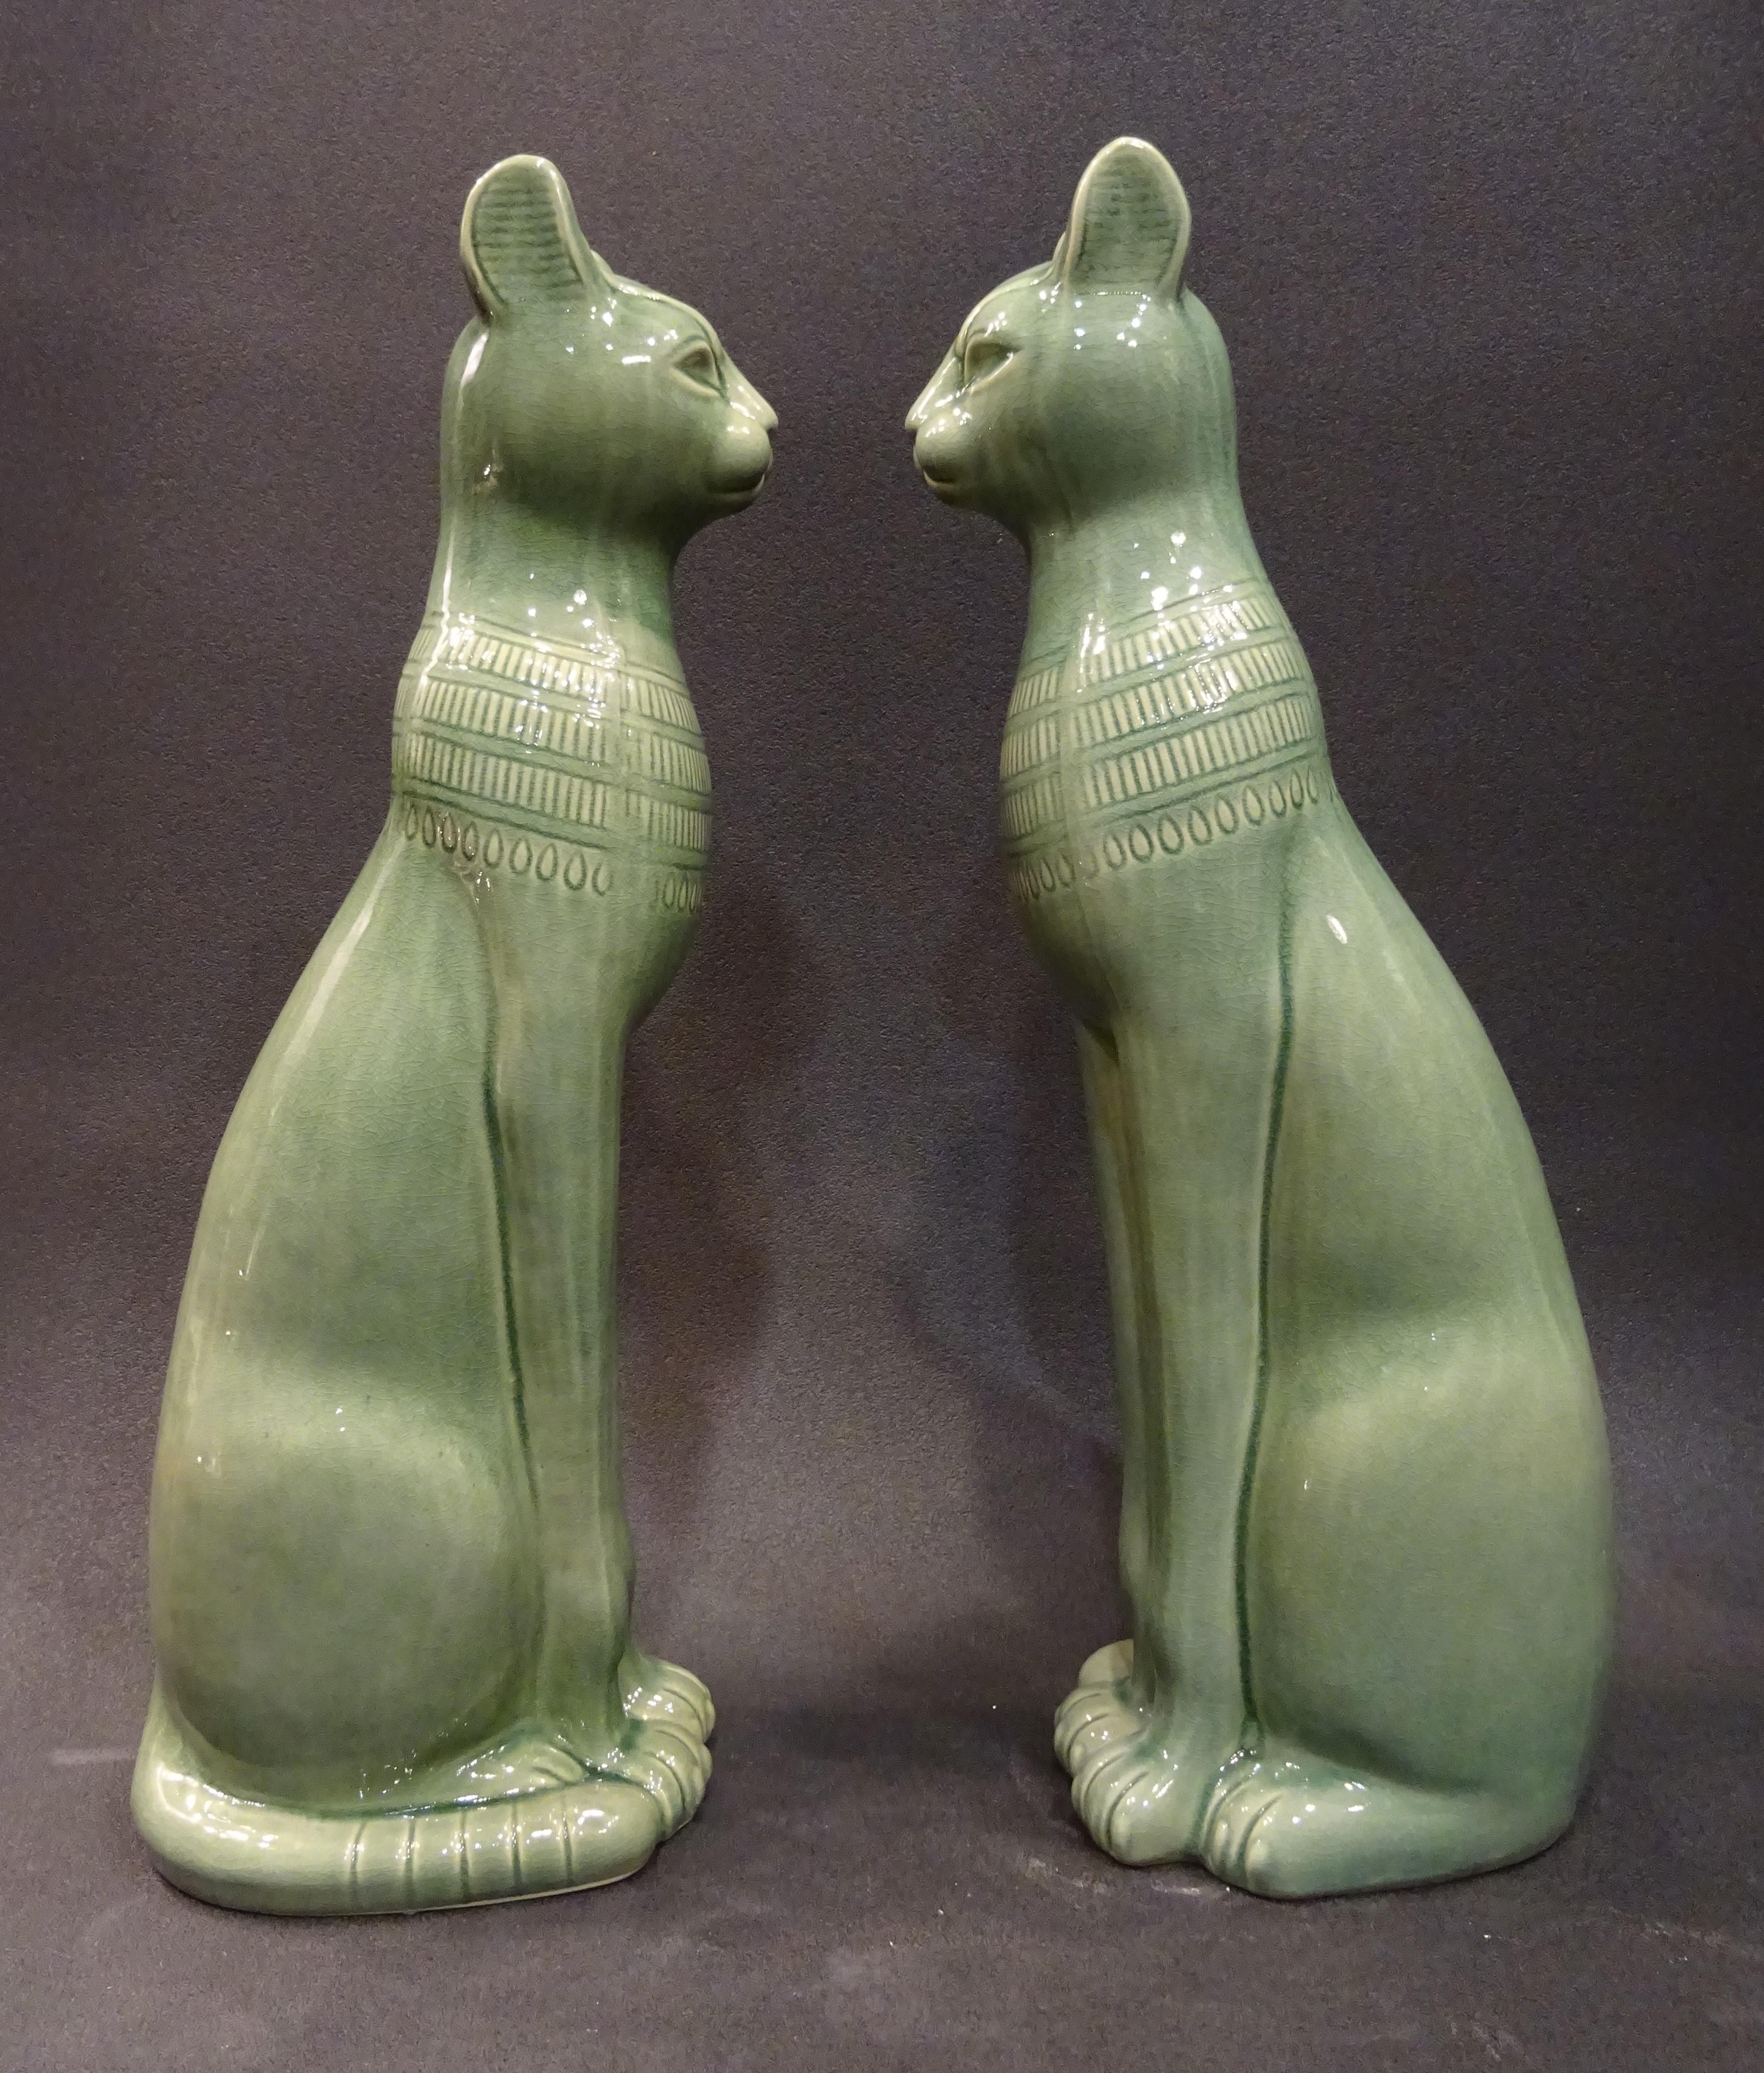 1960s Italy Couple of Cats Sculptures in Celadon Color Ceramic 12